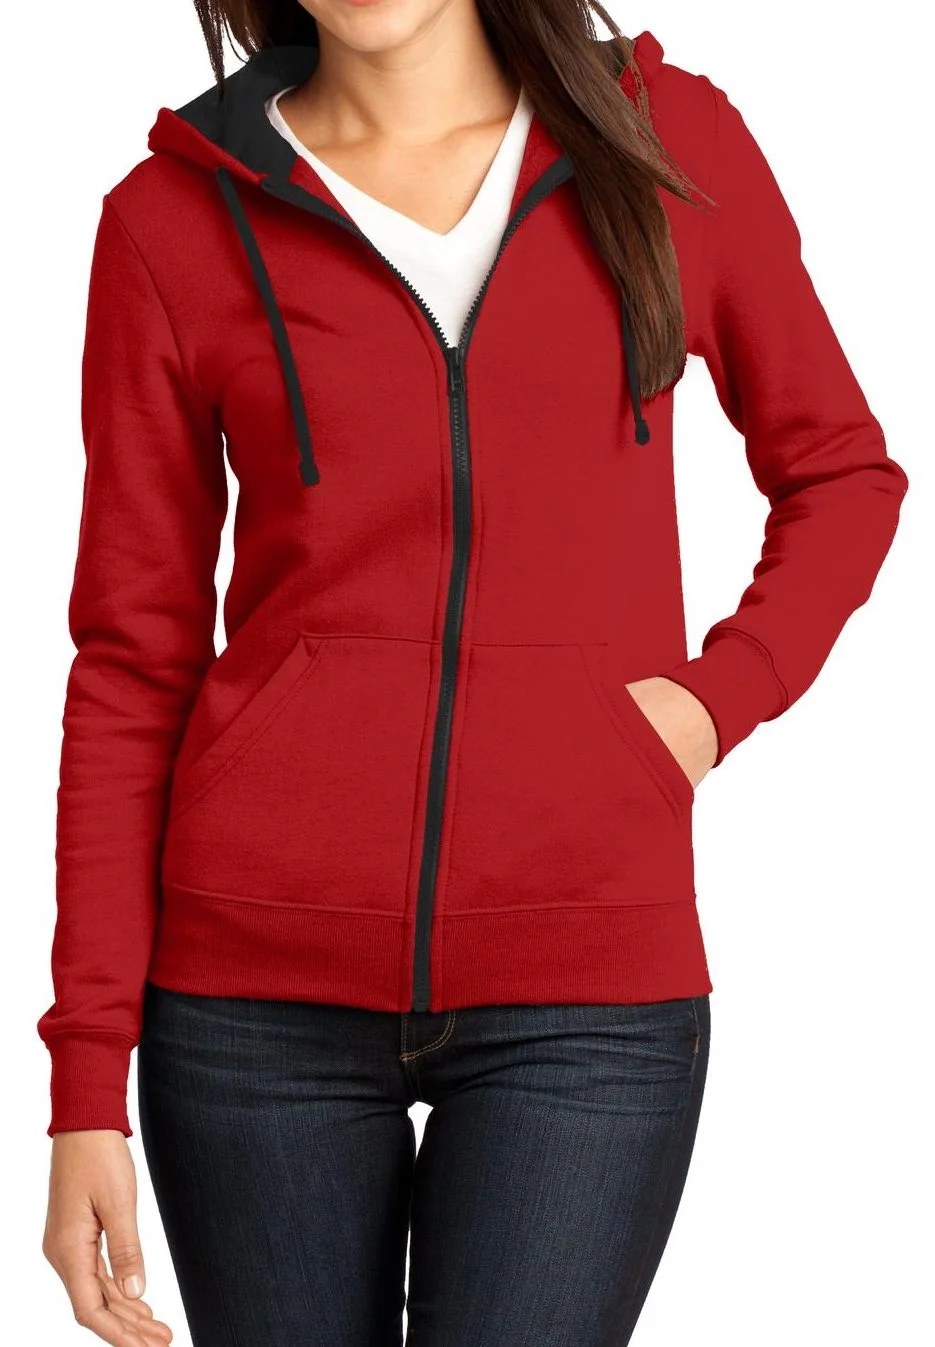 Hoodies - Bangladesh Factory, Suppliers, Manufacturers